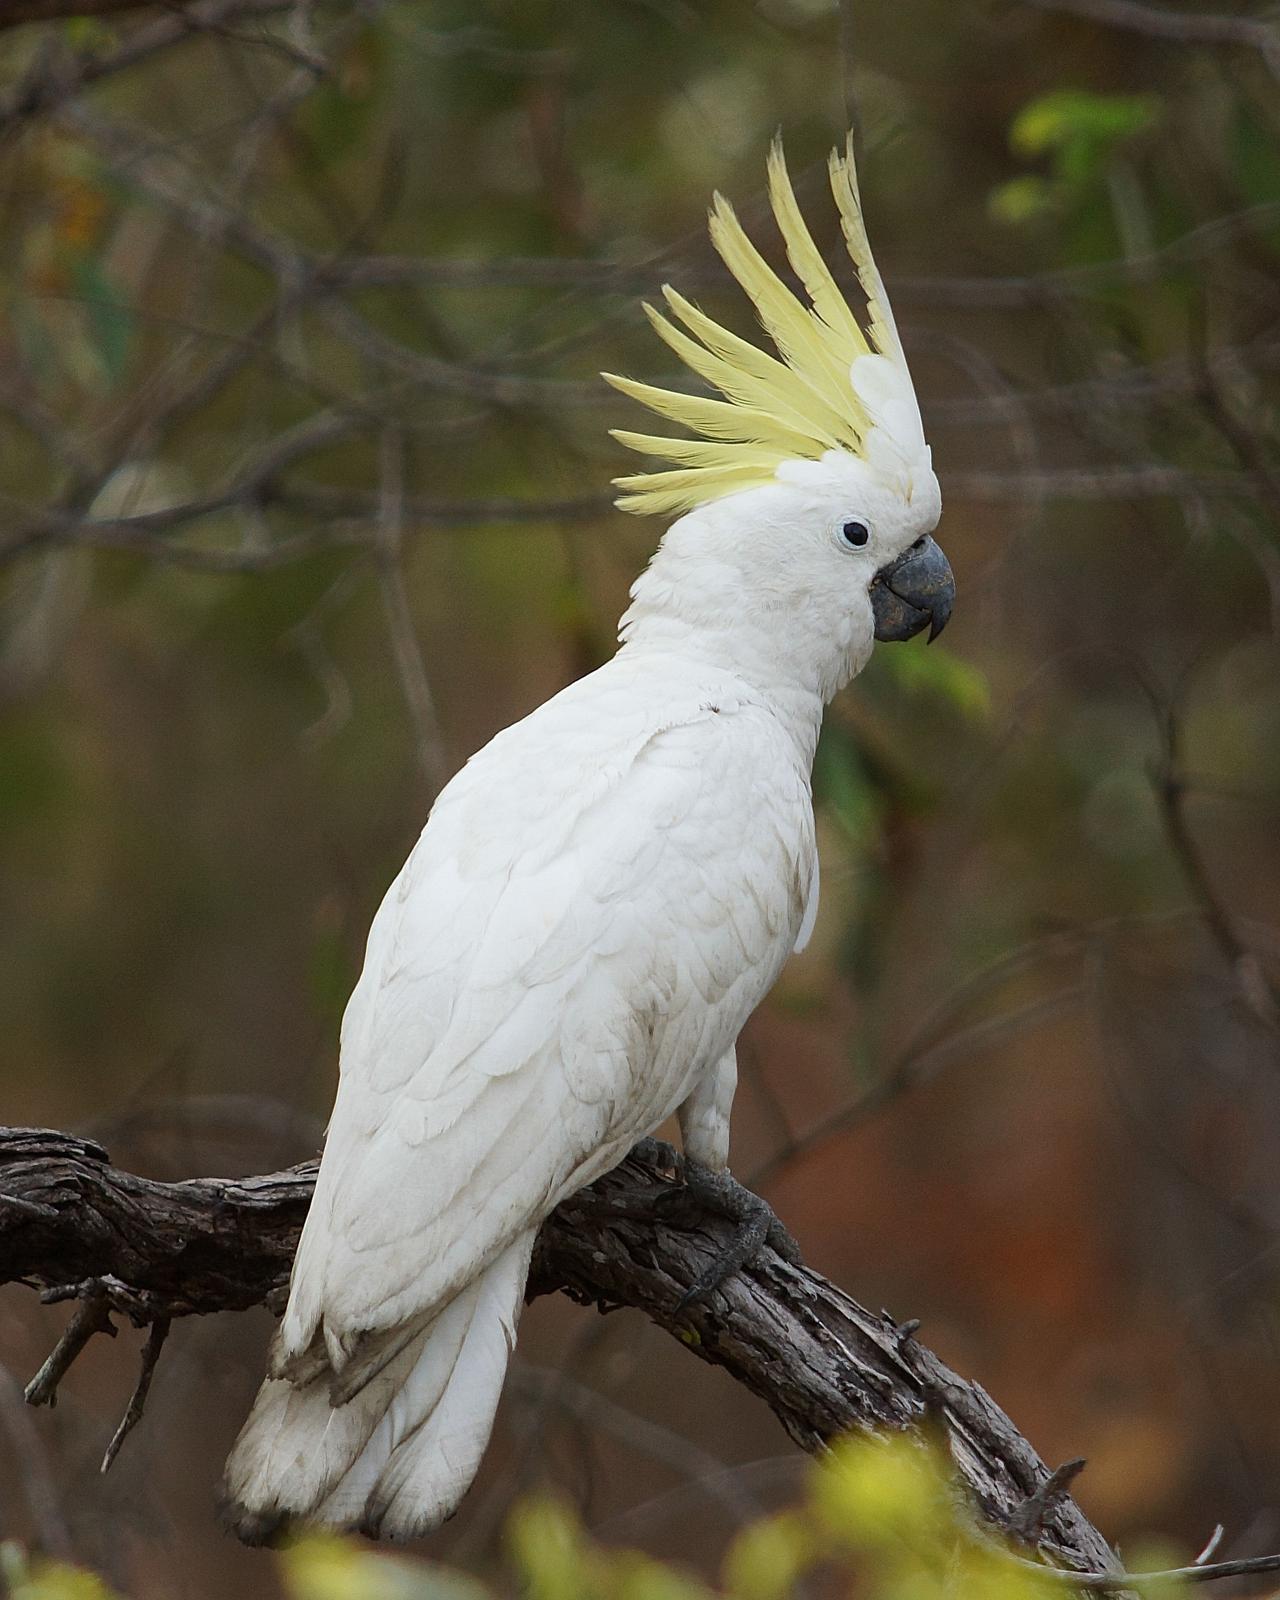 Sulphur-crested Cockatoo Photo by Steve Percival